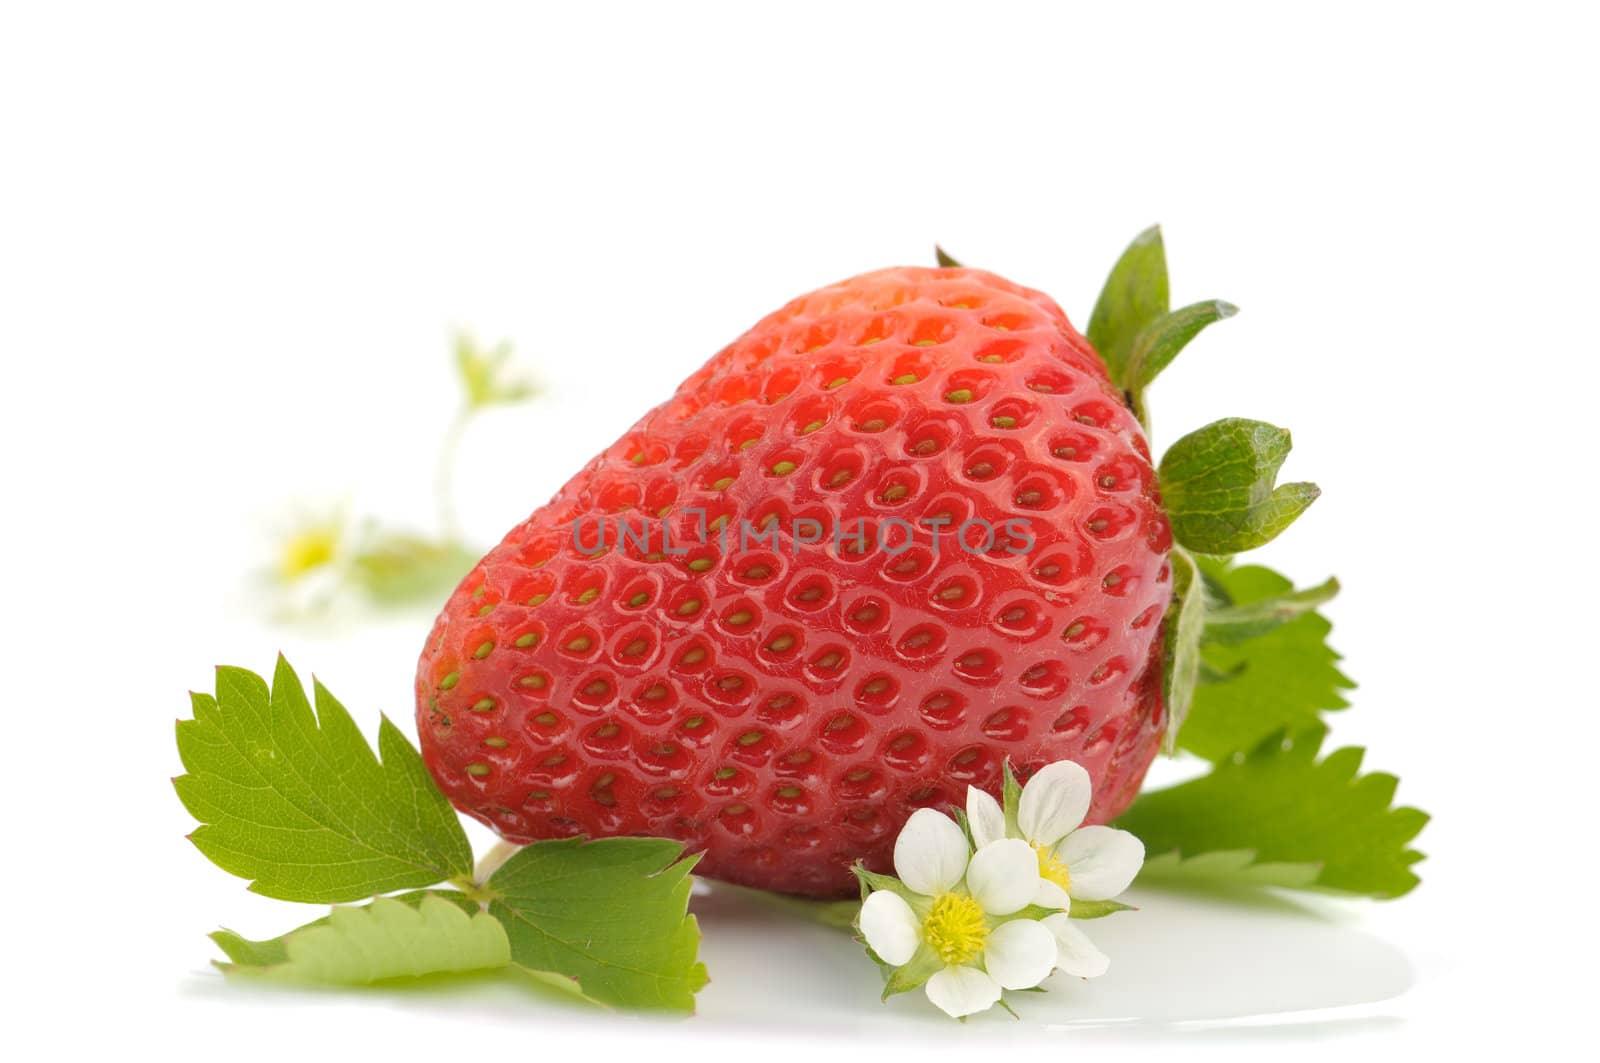 Macro of strawberry fruit and flowers on white background